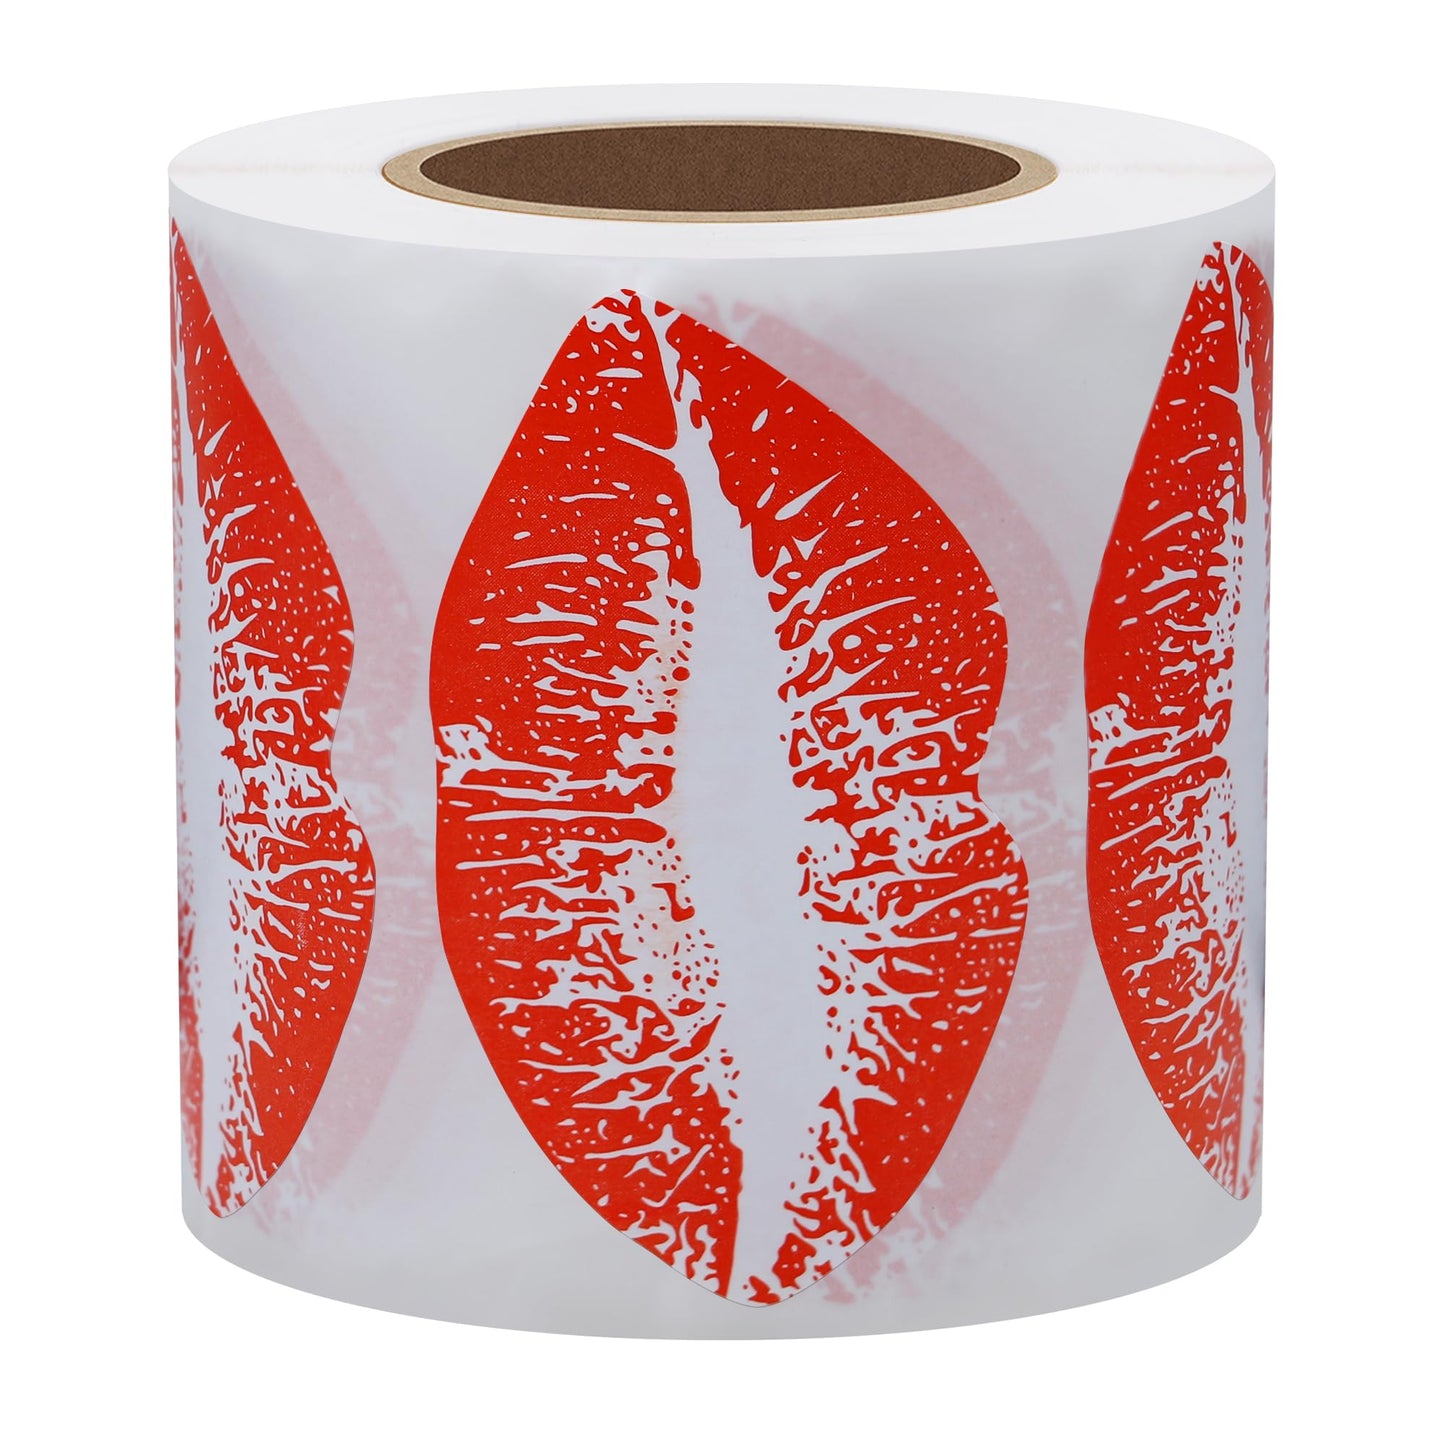 Hybsk Red Kissing Lips Removable Body Stickers Total 300 Per Roll